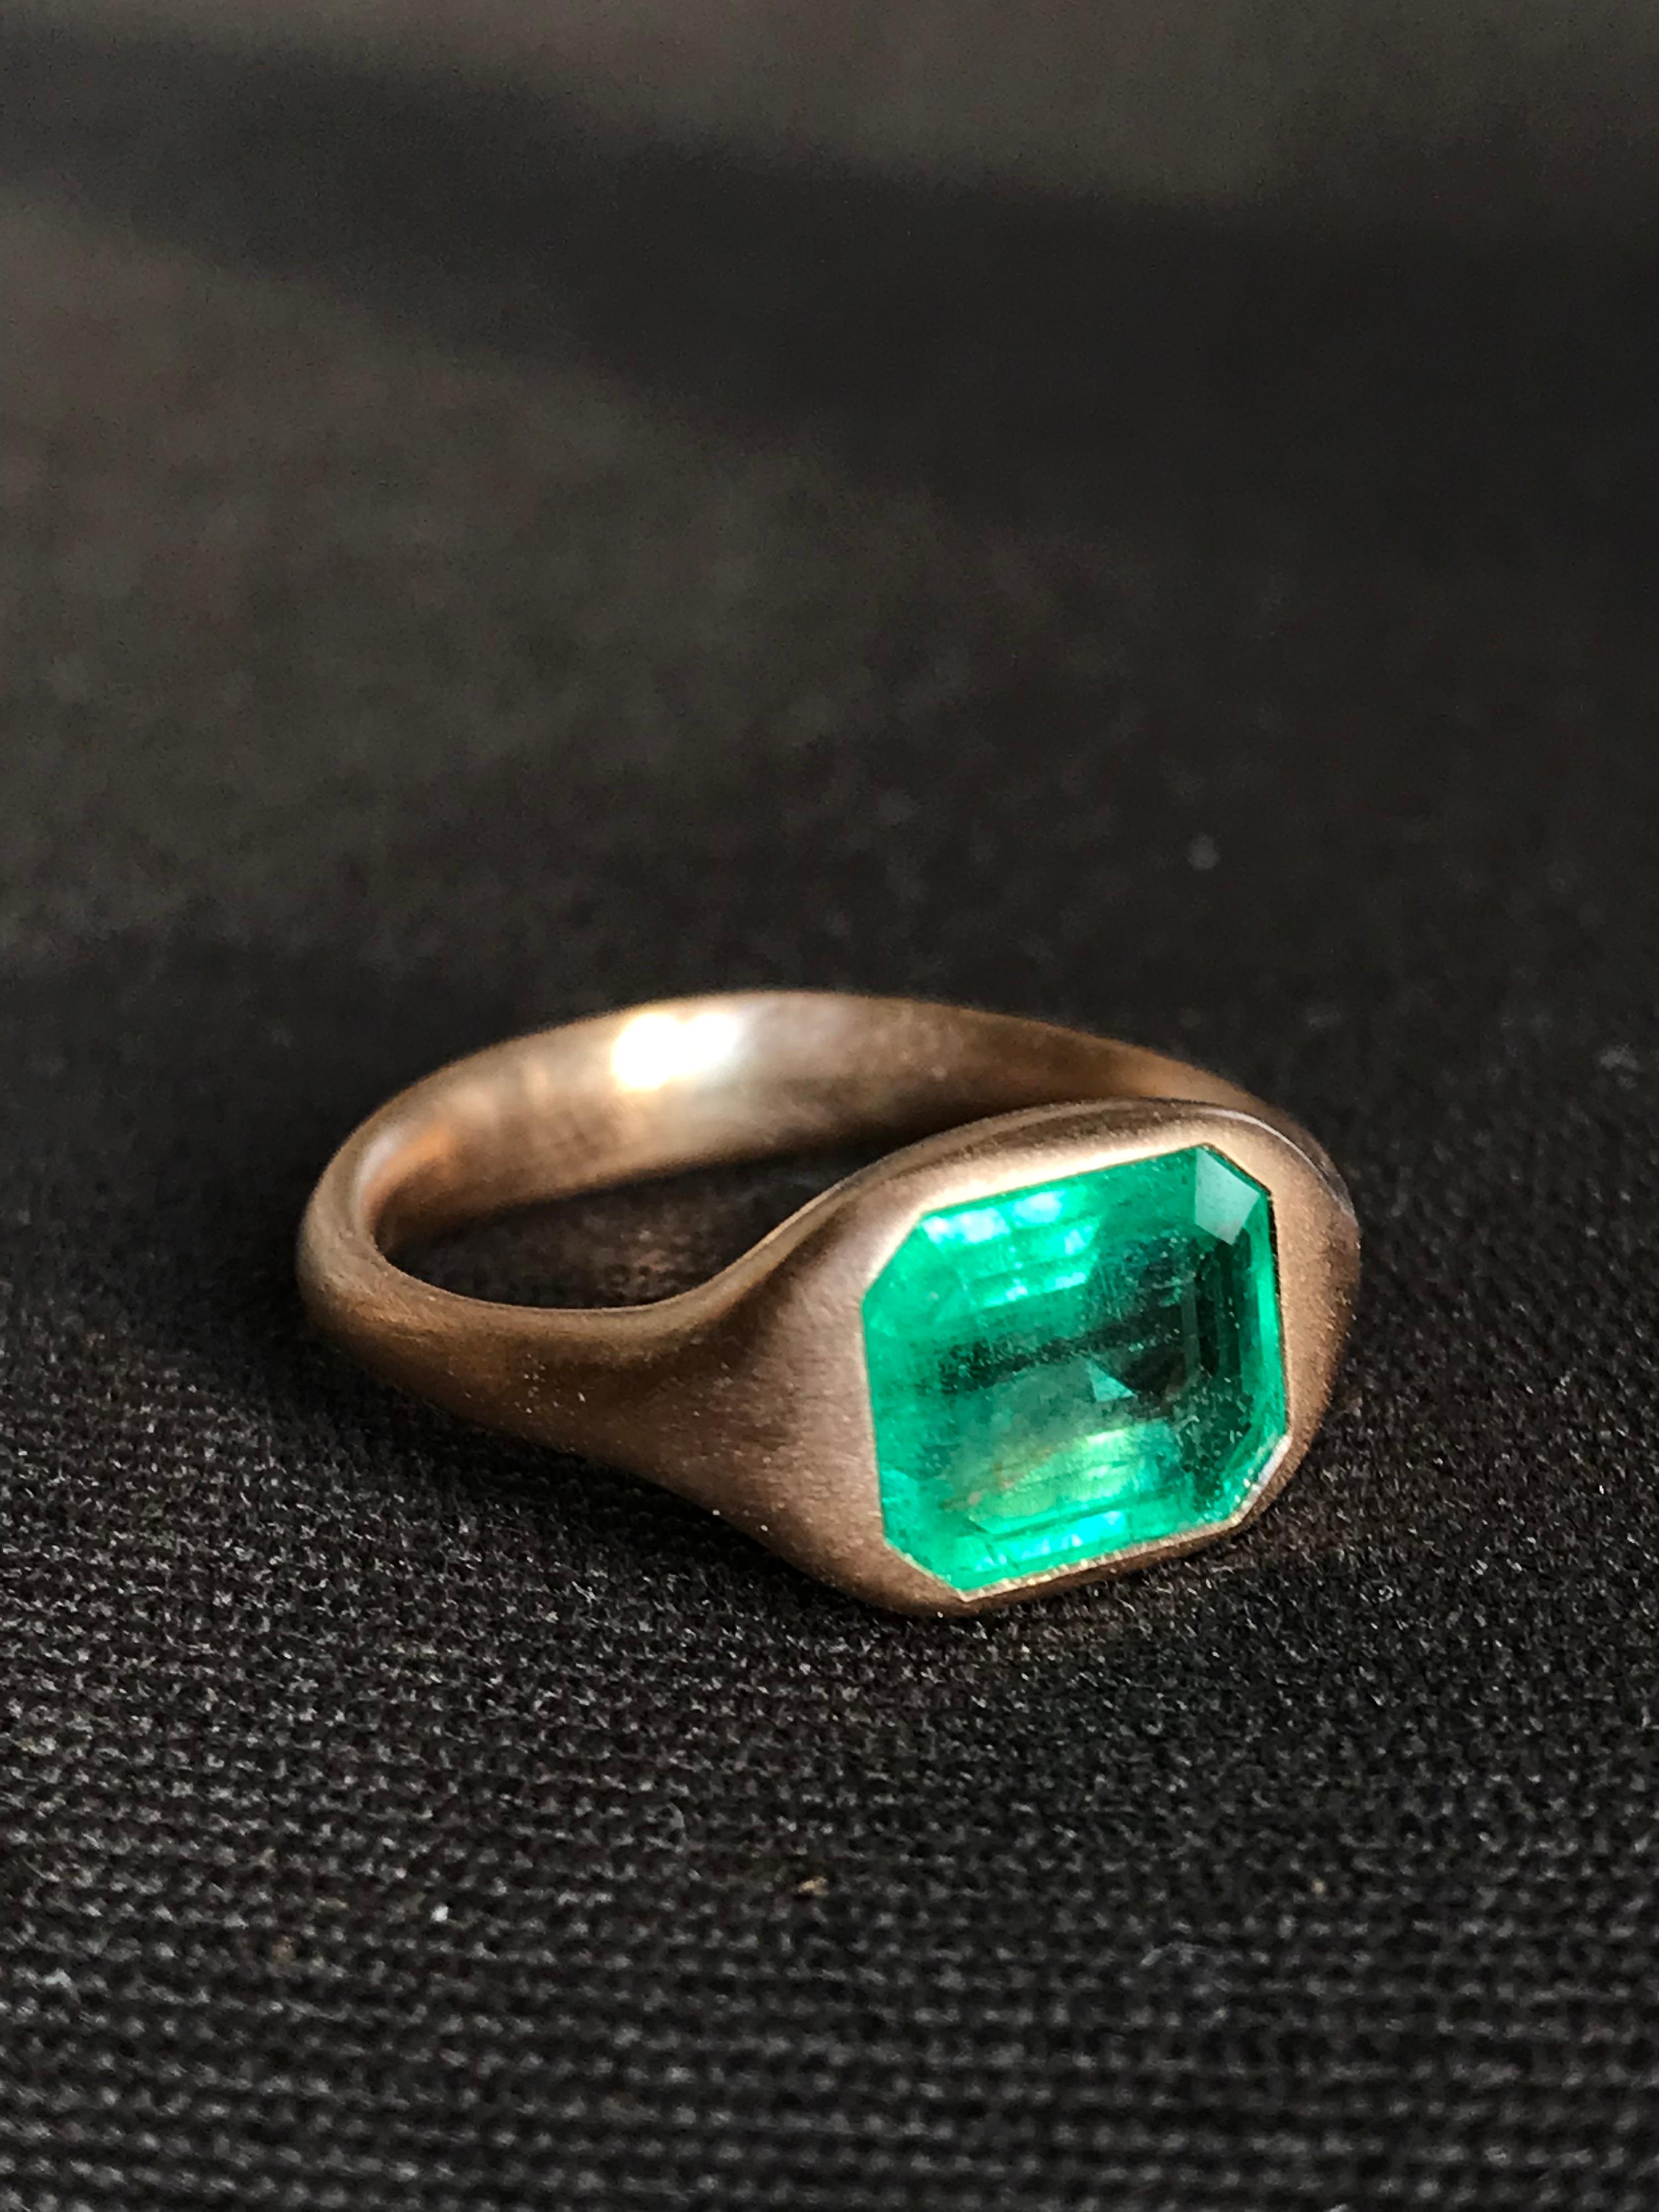 Dalben design One of a Kind 18k rose gold satin finishing ring with a 2,33 carat bezel-set emerald cut emerald. 
Ring size 7 1/4  USA - EU 55 re-sizable to most finger sizes. 
Bezel stone dimensions :
width 11,8 mm
height 9,3 mm
The ring has been